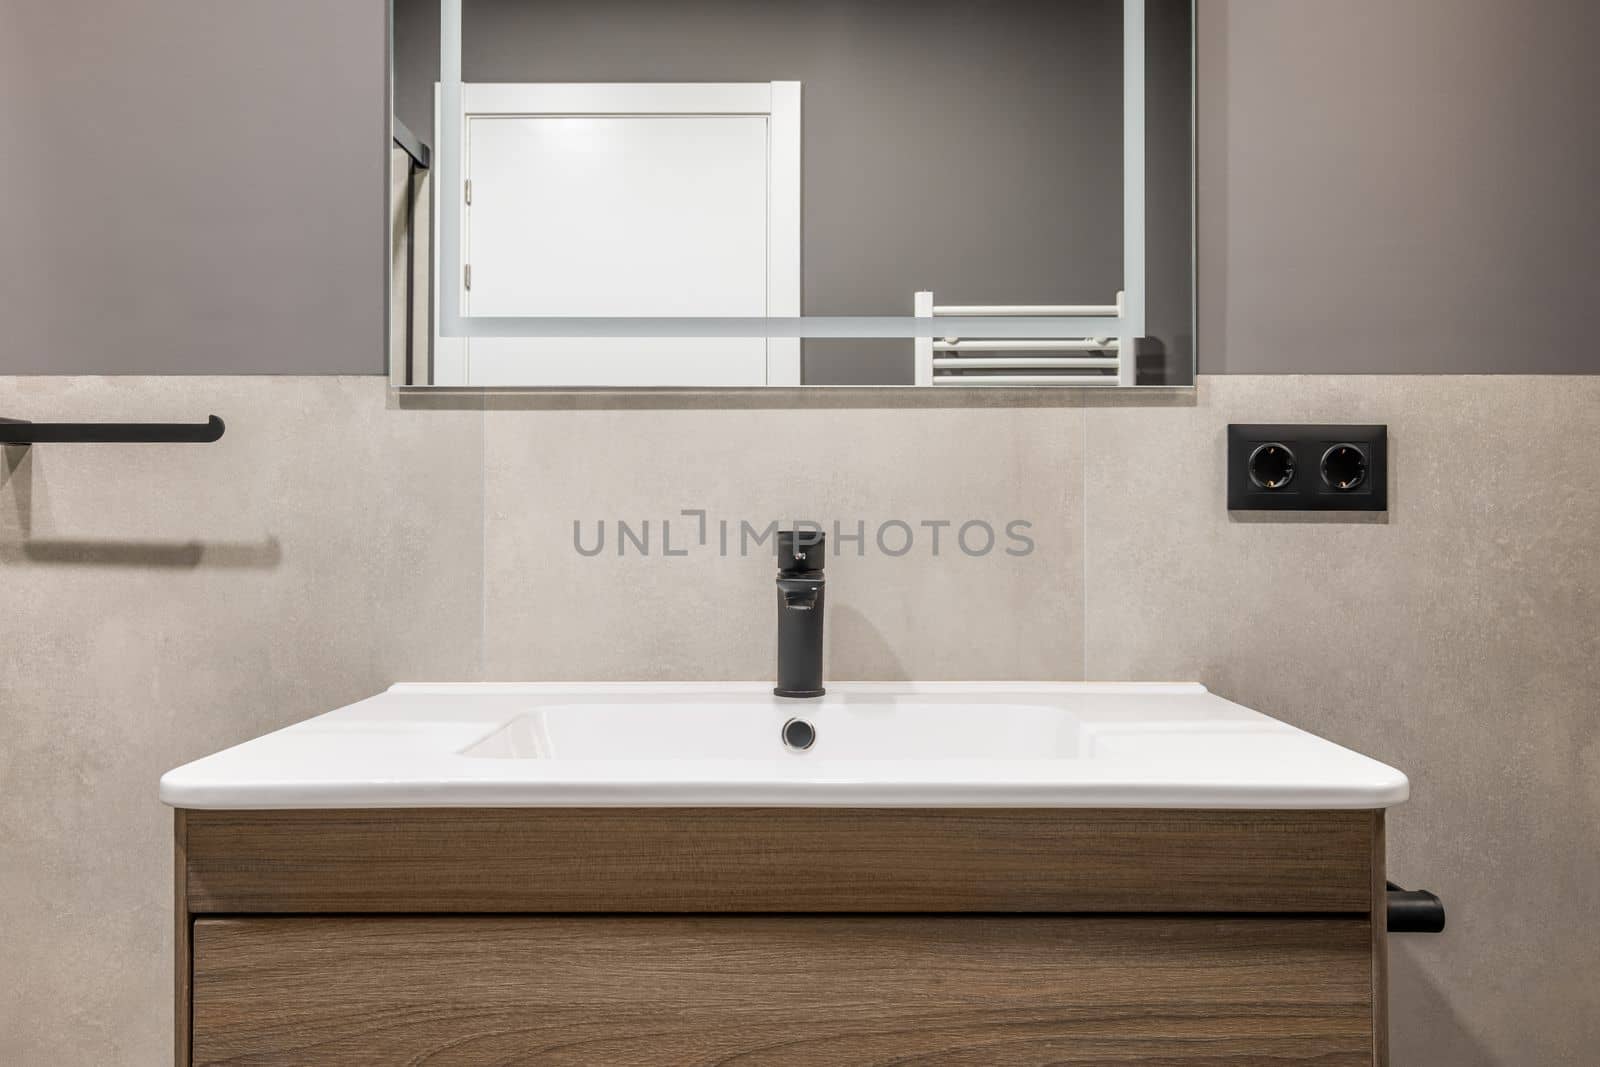 Square white ceramic sink on wooden table with drawers. On wall is mirror with white neon lighting. Mirror reflects white door and towel radiator. Walls are combination of marble tiles and gray paint. by apavlin